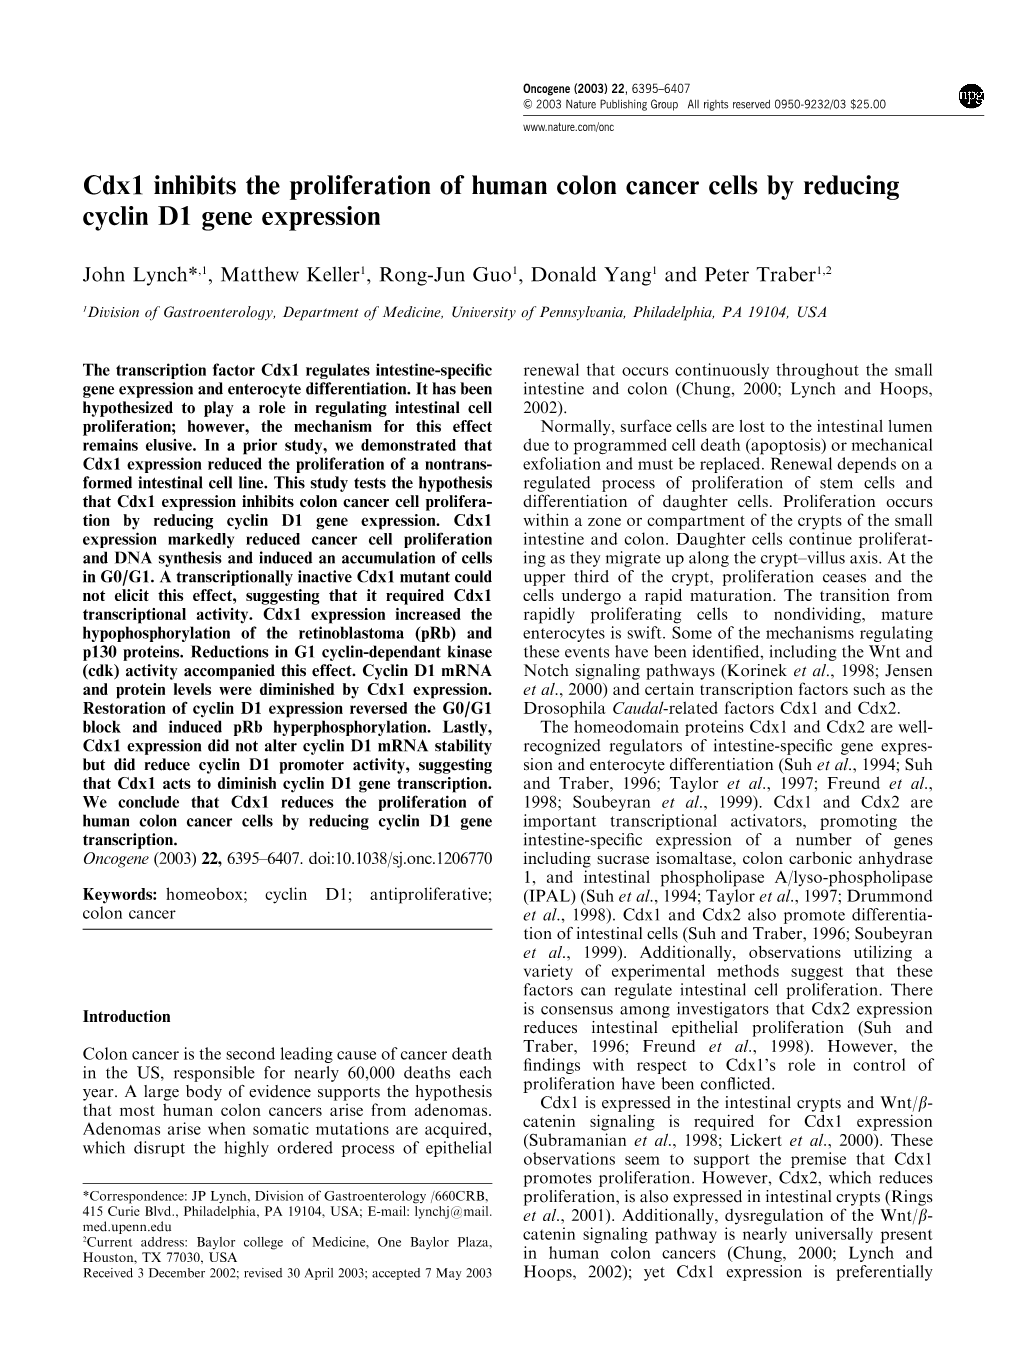 Cdx1 Inhibits the Proliferation of Human Colon Cancer Cells by Reducing Cyclin D1 Gene Expression